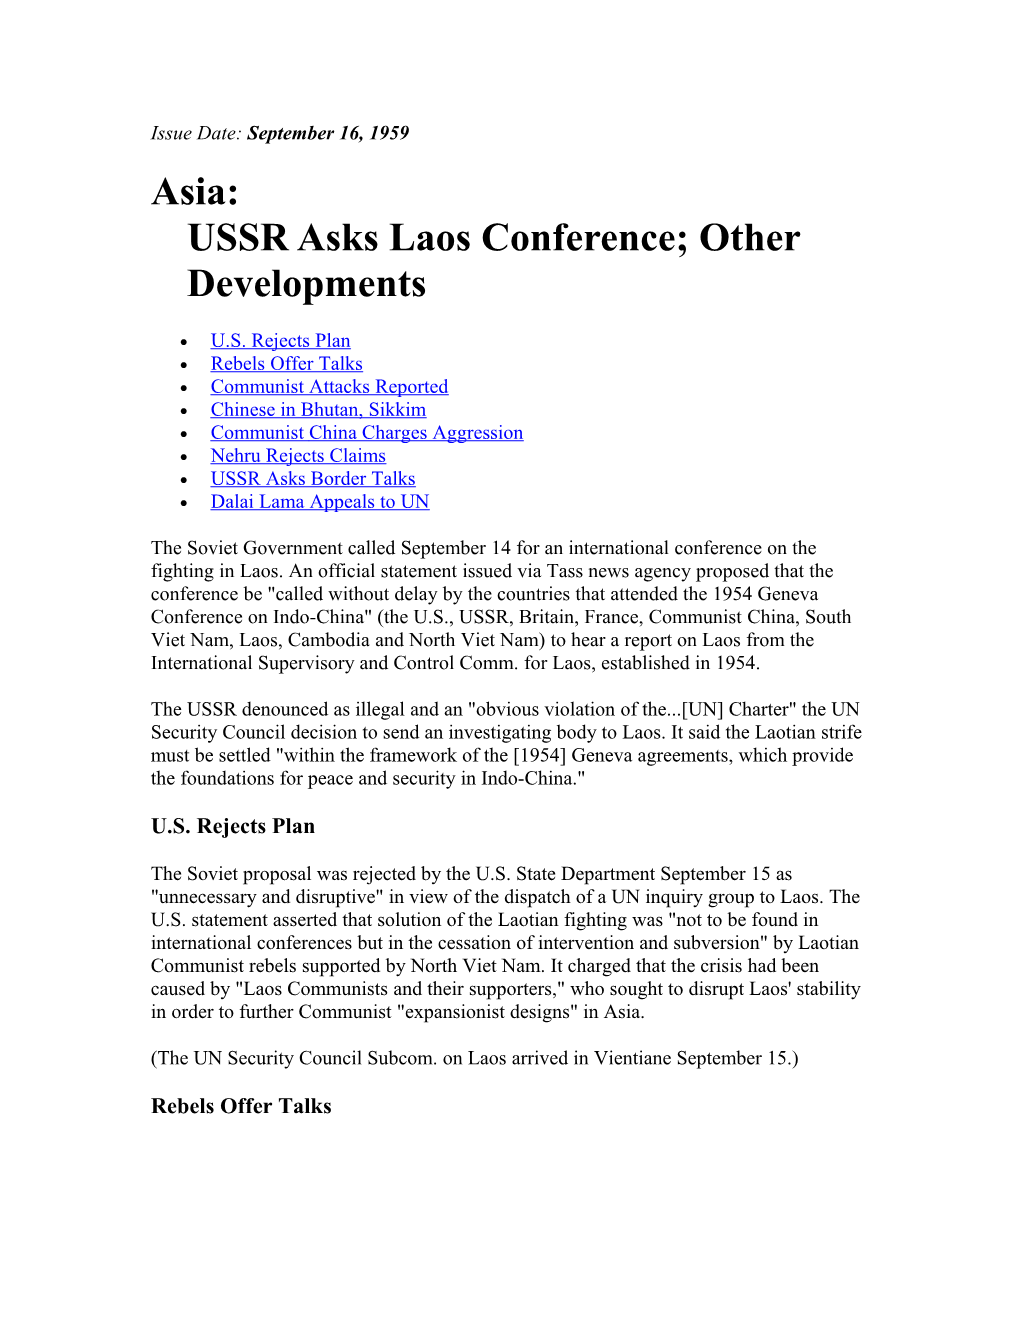 Asia:USSR Asks Laos Conference; Other Developments